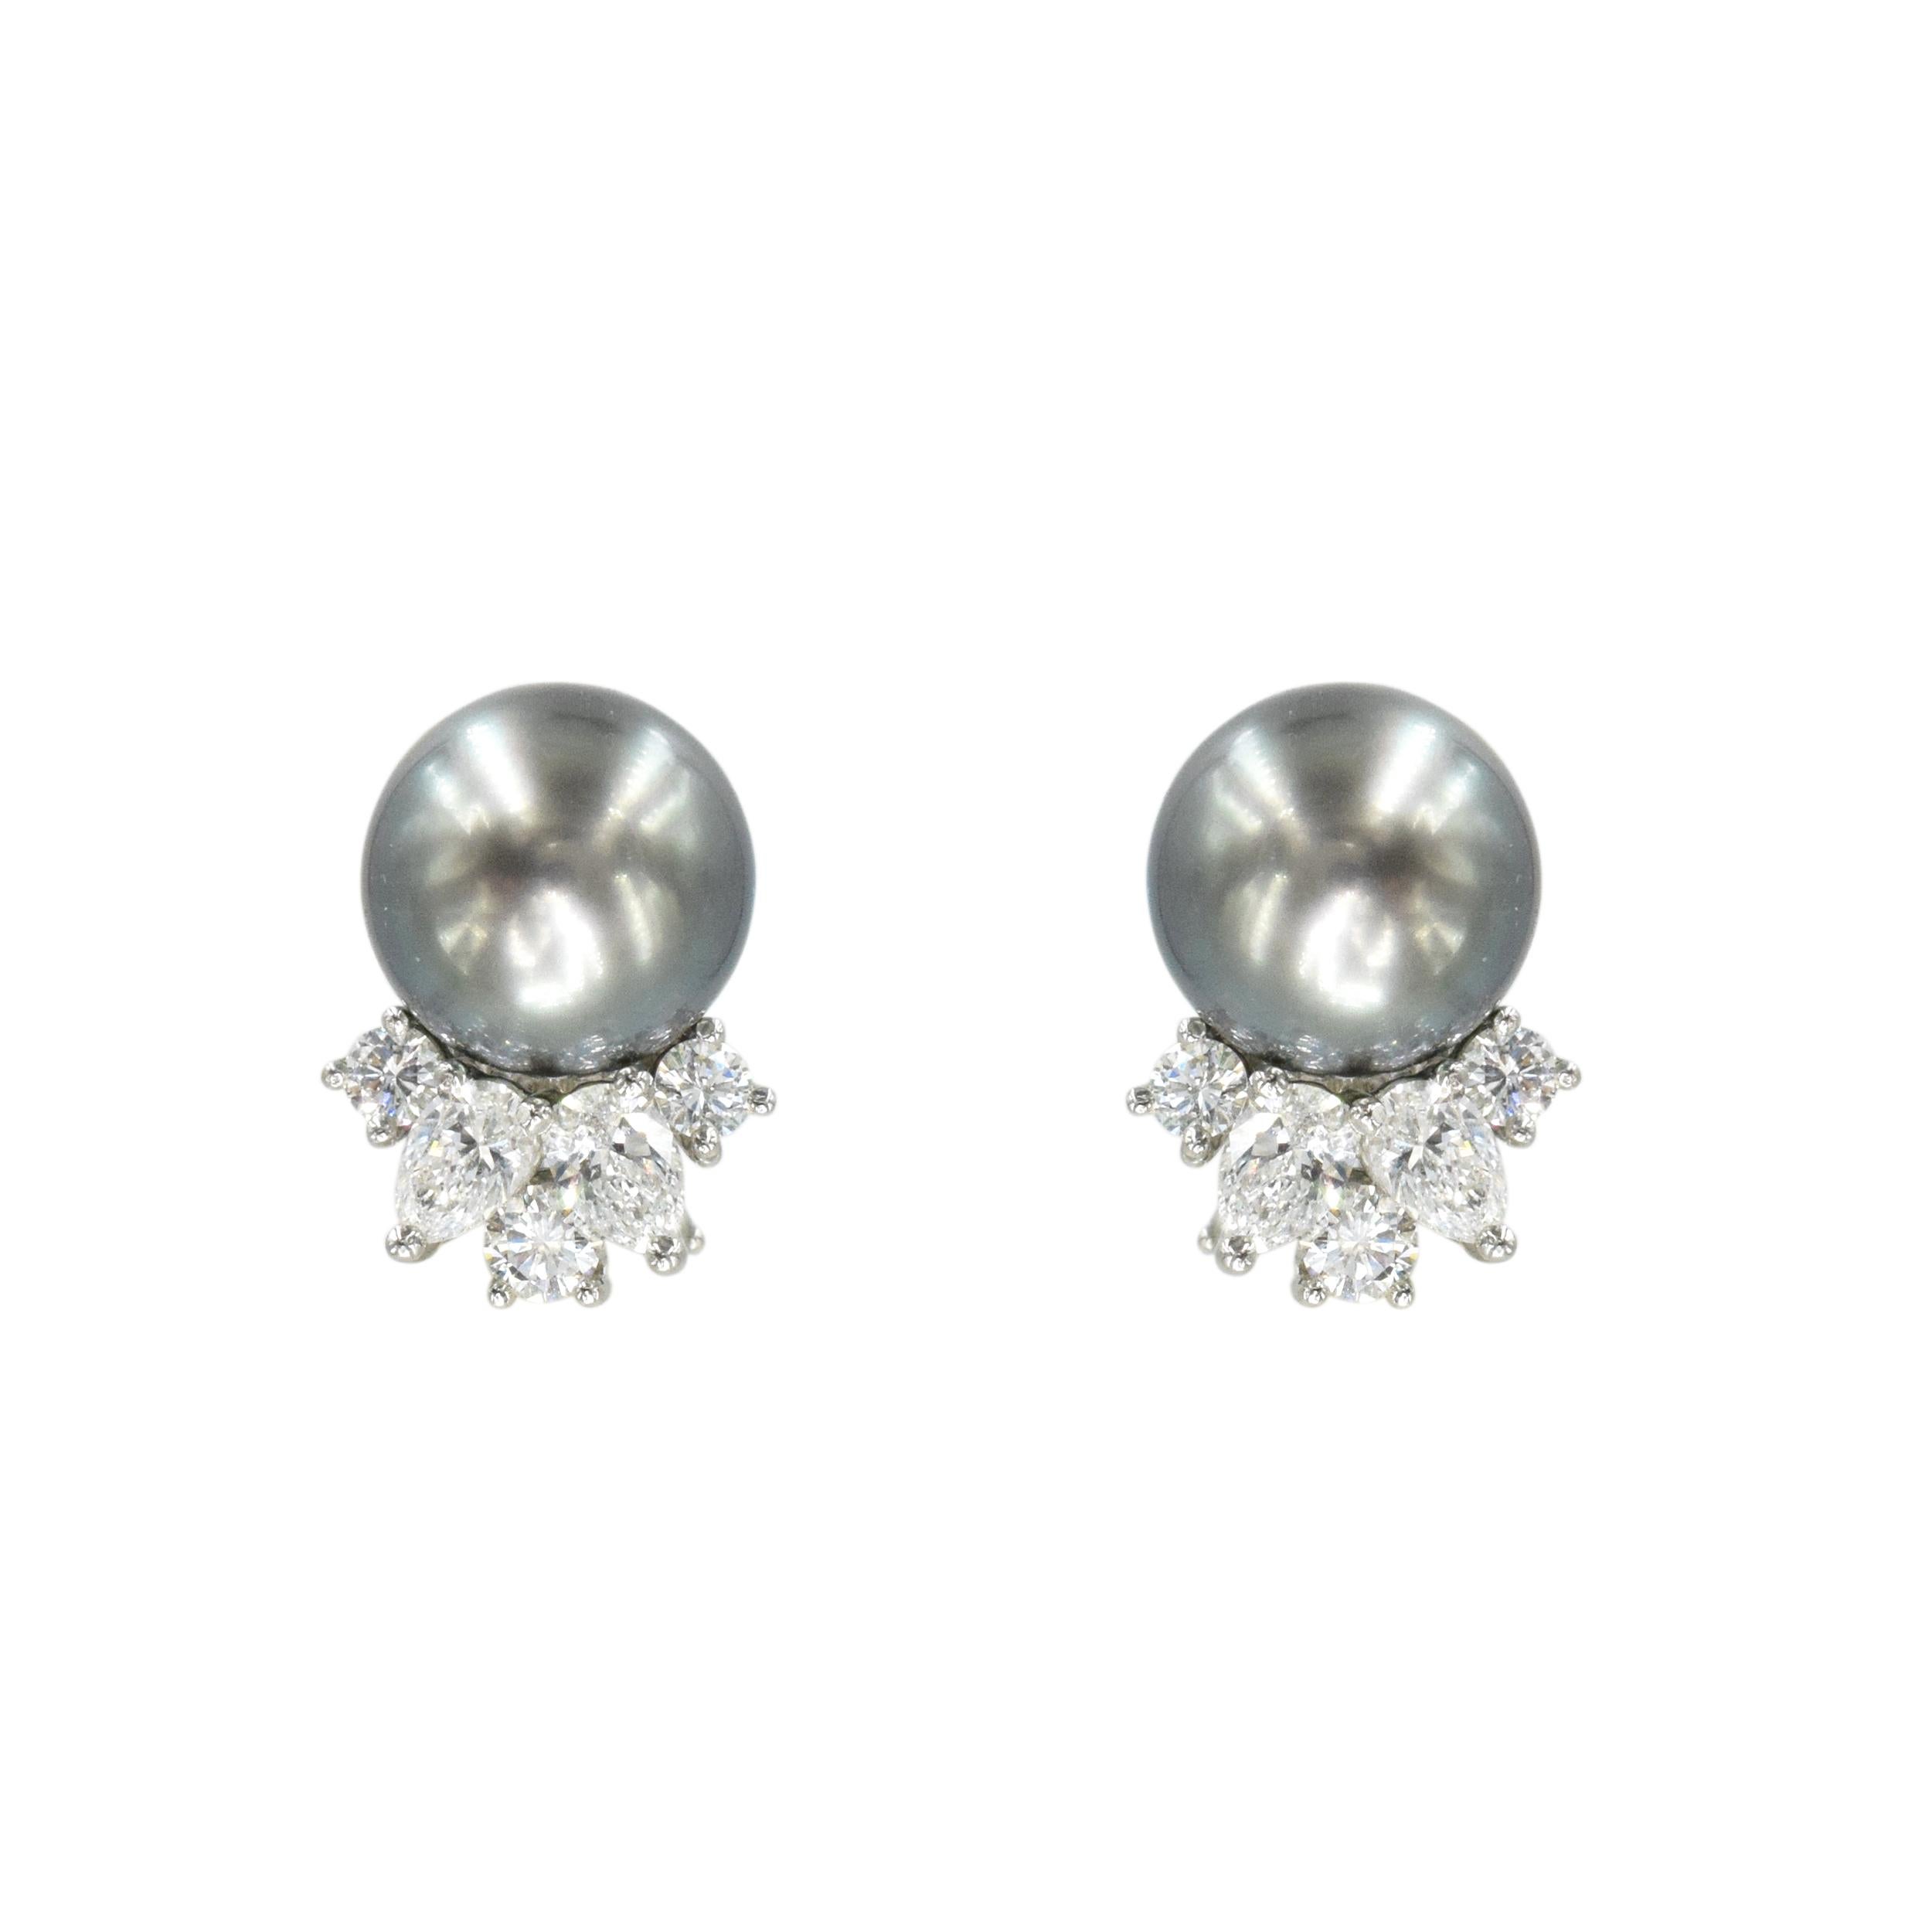 Tiffany & Co. Black pearl and diamond earrings in platinum. These earrings feature
9.5mm black pearls accented with 6 round brilliant cut and four pear shape
diamonds, set at the  bottom of the pearls. Total weight of the diamonds is approximately